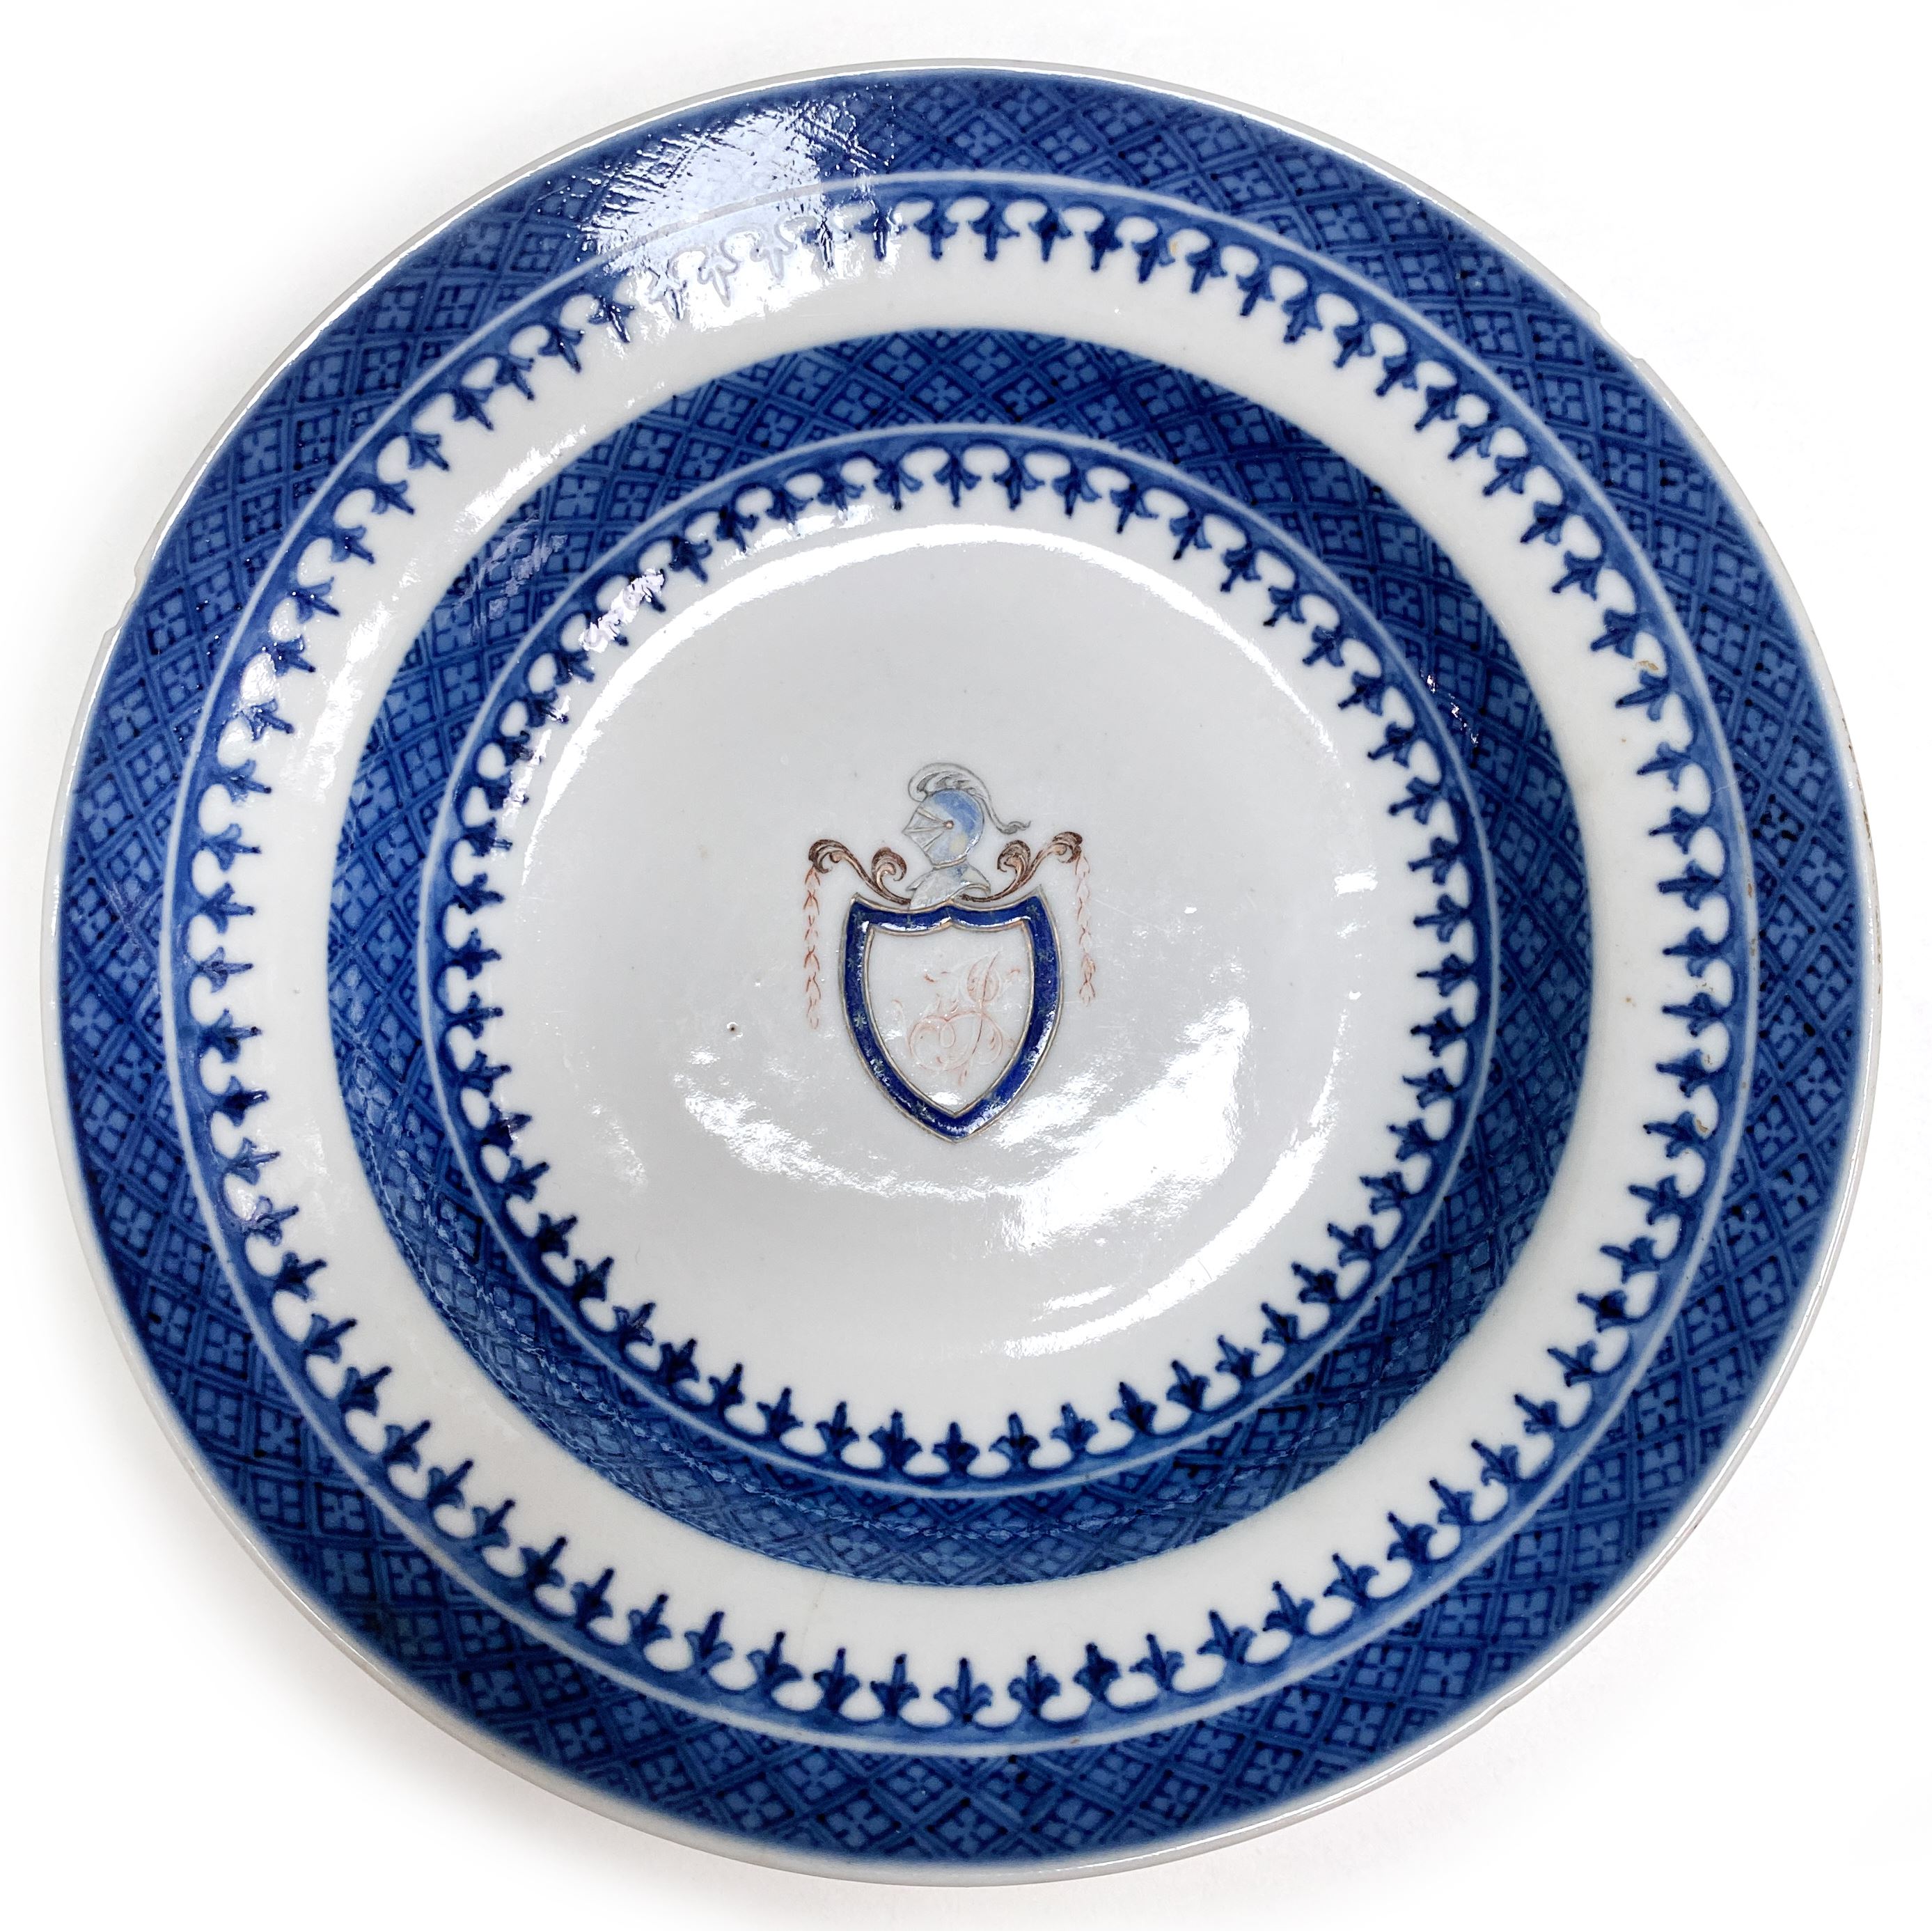 Circa-1790s Chinese export porcelain bowl from Thomas Jefferson's White House service china, est. $15,000-$18,000